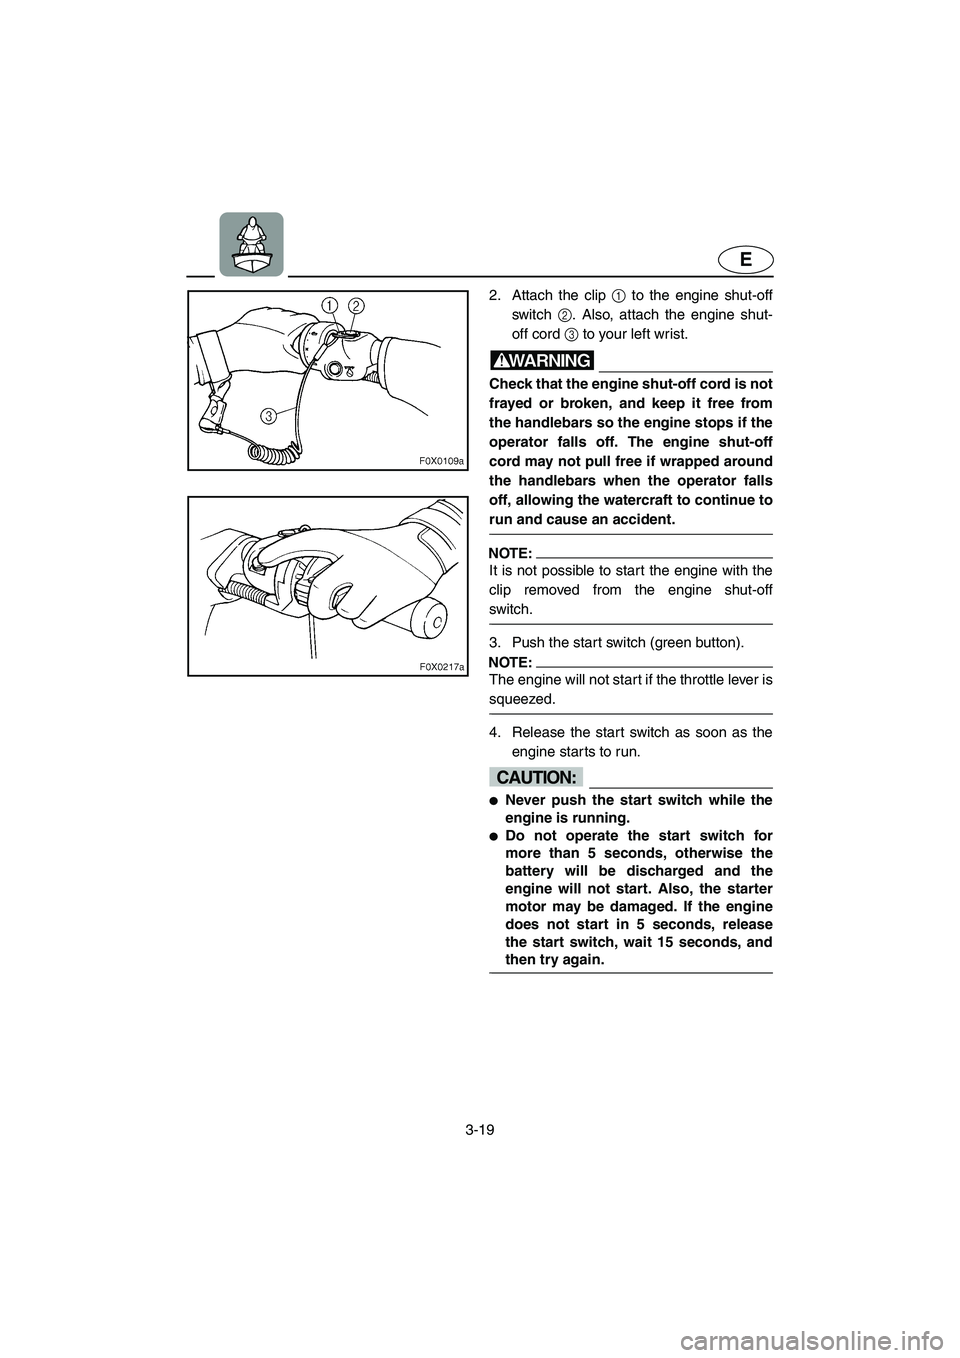 YAMAHA GP1300R 2006  Owners Manual 3-19
E
2. Attach the clip 1 to the engine shut-off
switch 2. Also, attach the engine shut-
off cord 3 to your left wrist.
WARNING@ Check that the engine shut-off cord is not
frayed or broken, and keep